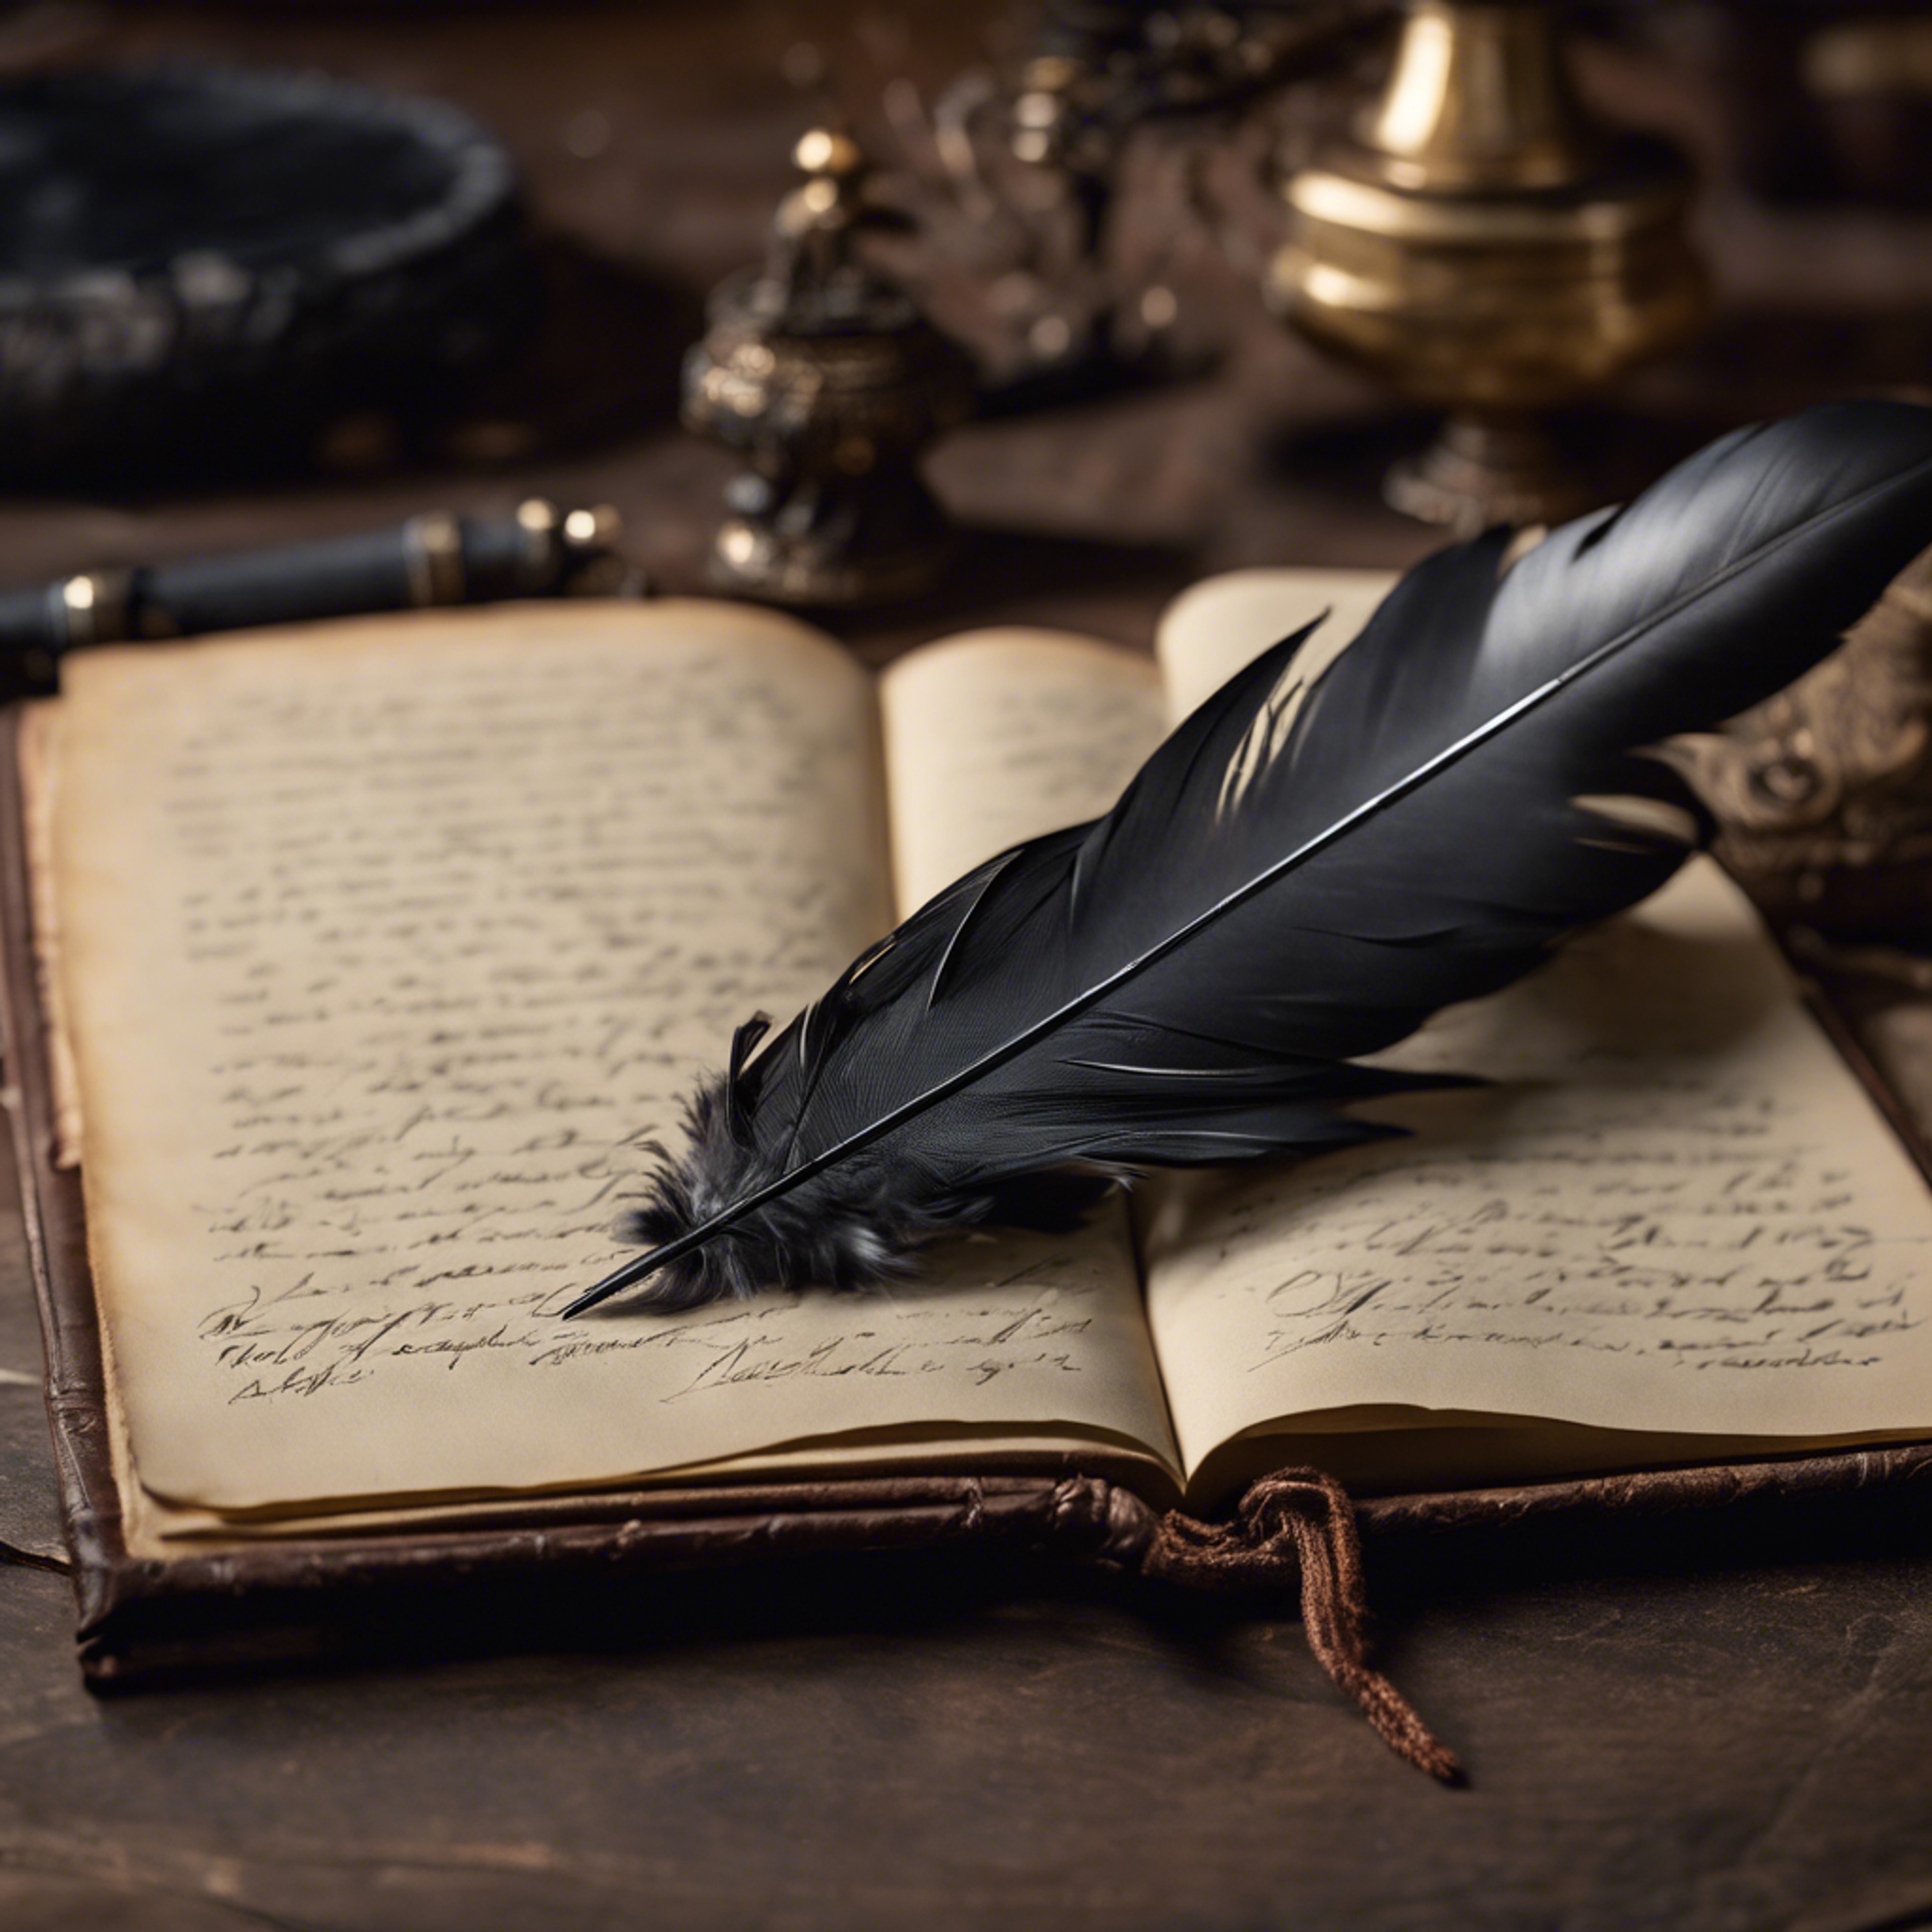 A black feather quill pen poised to write in an antique leather-bound journal. Дэлгэцийн зураг[1a576fd5c1f949af9941]